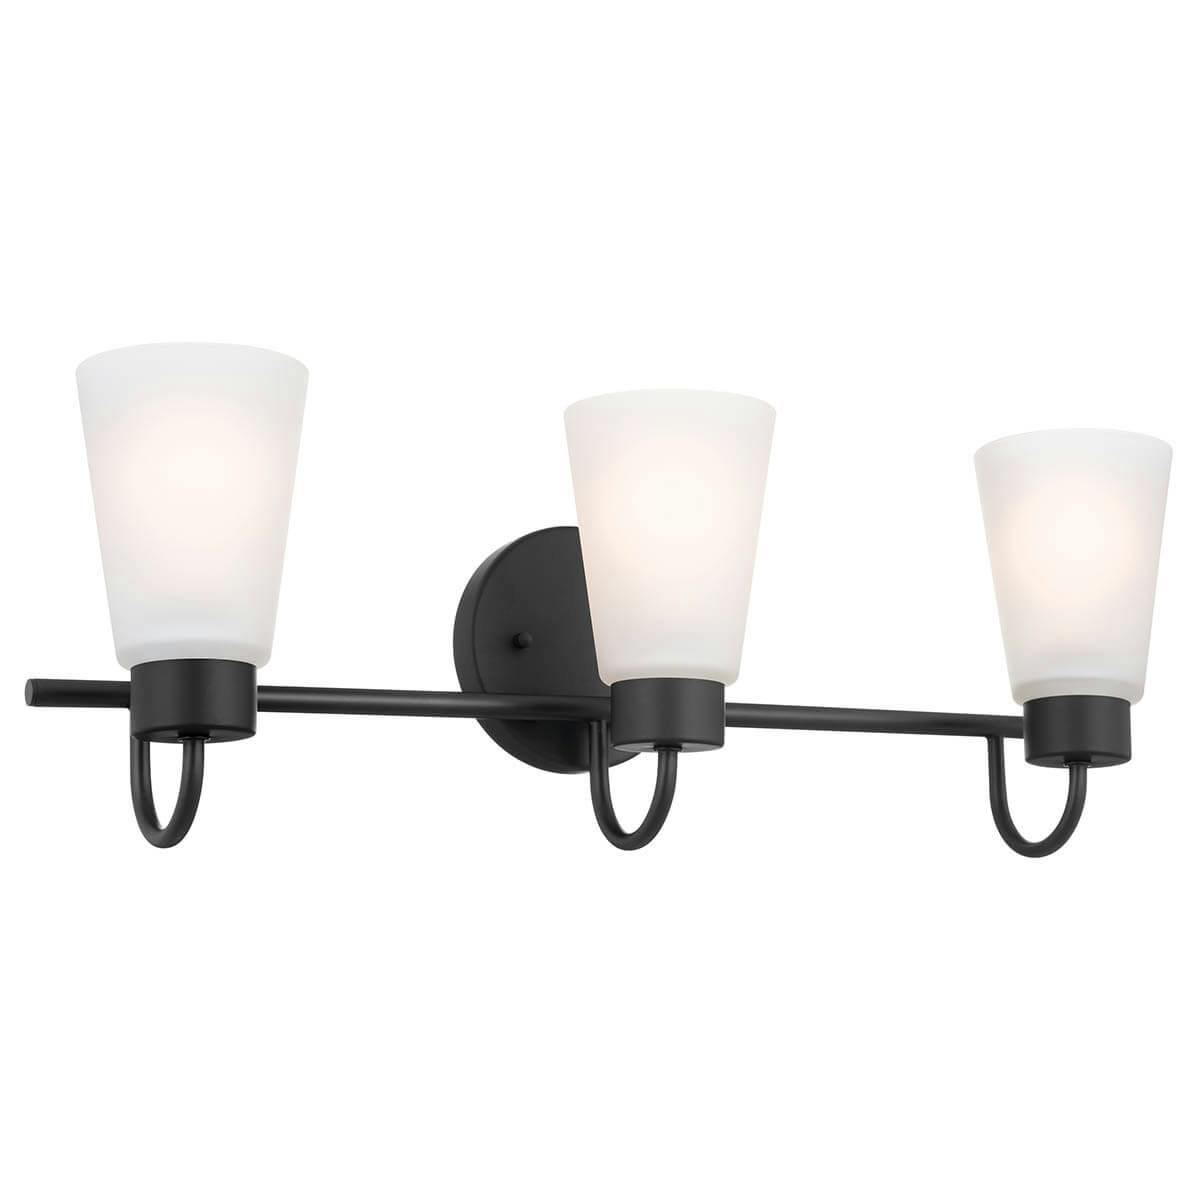 The Erma 20.5" 3 Light Vanity Light Black facing up on a white background